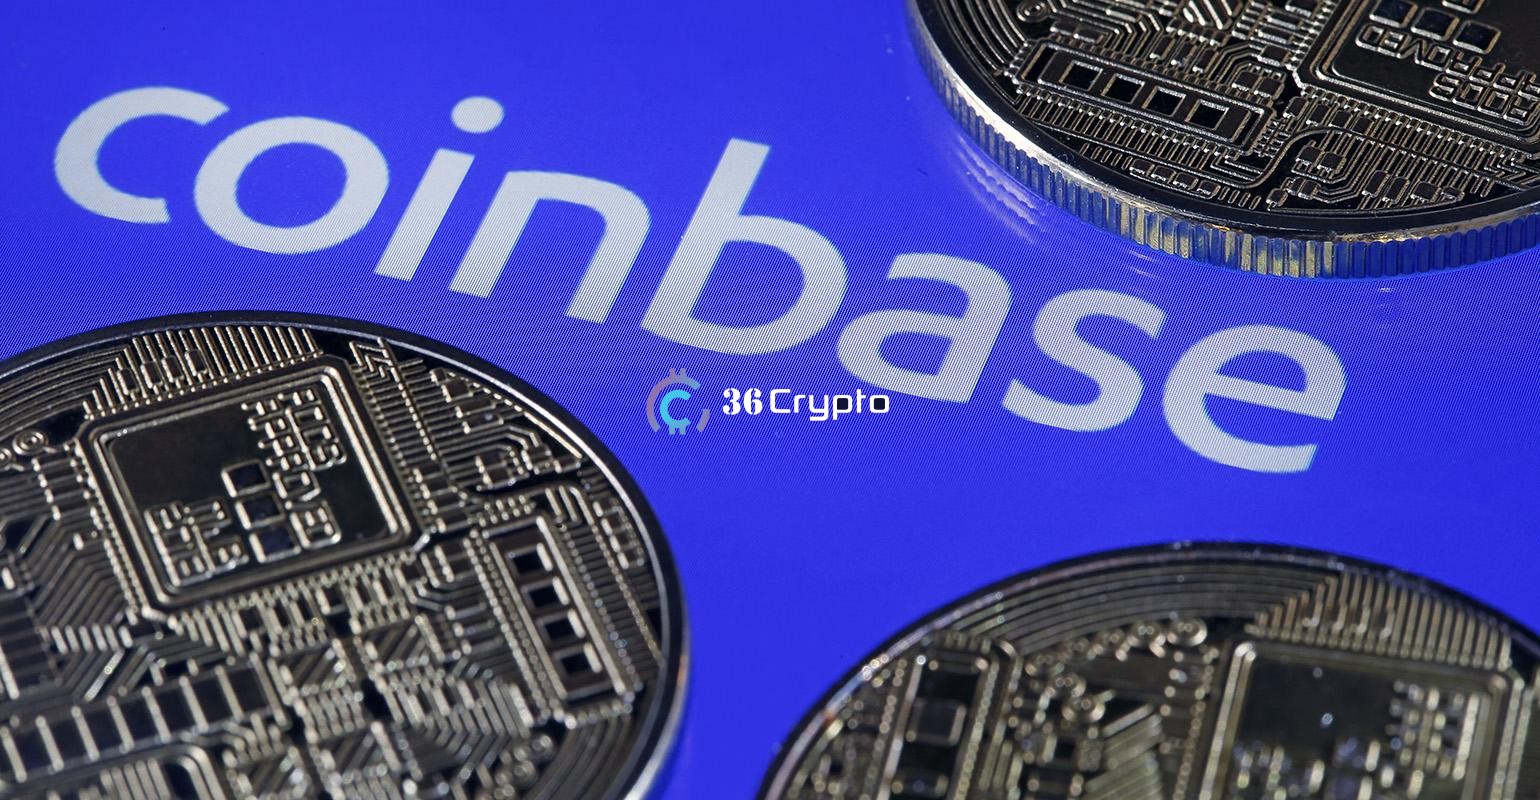 Coinabse Gets Full Regulatory Approval to Operate in Italy